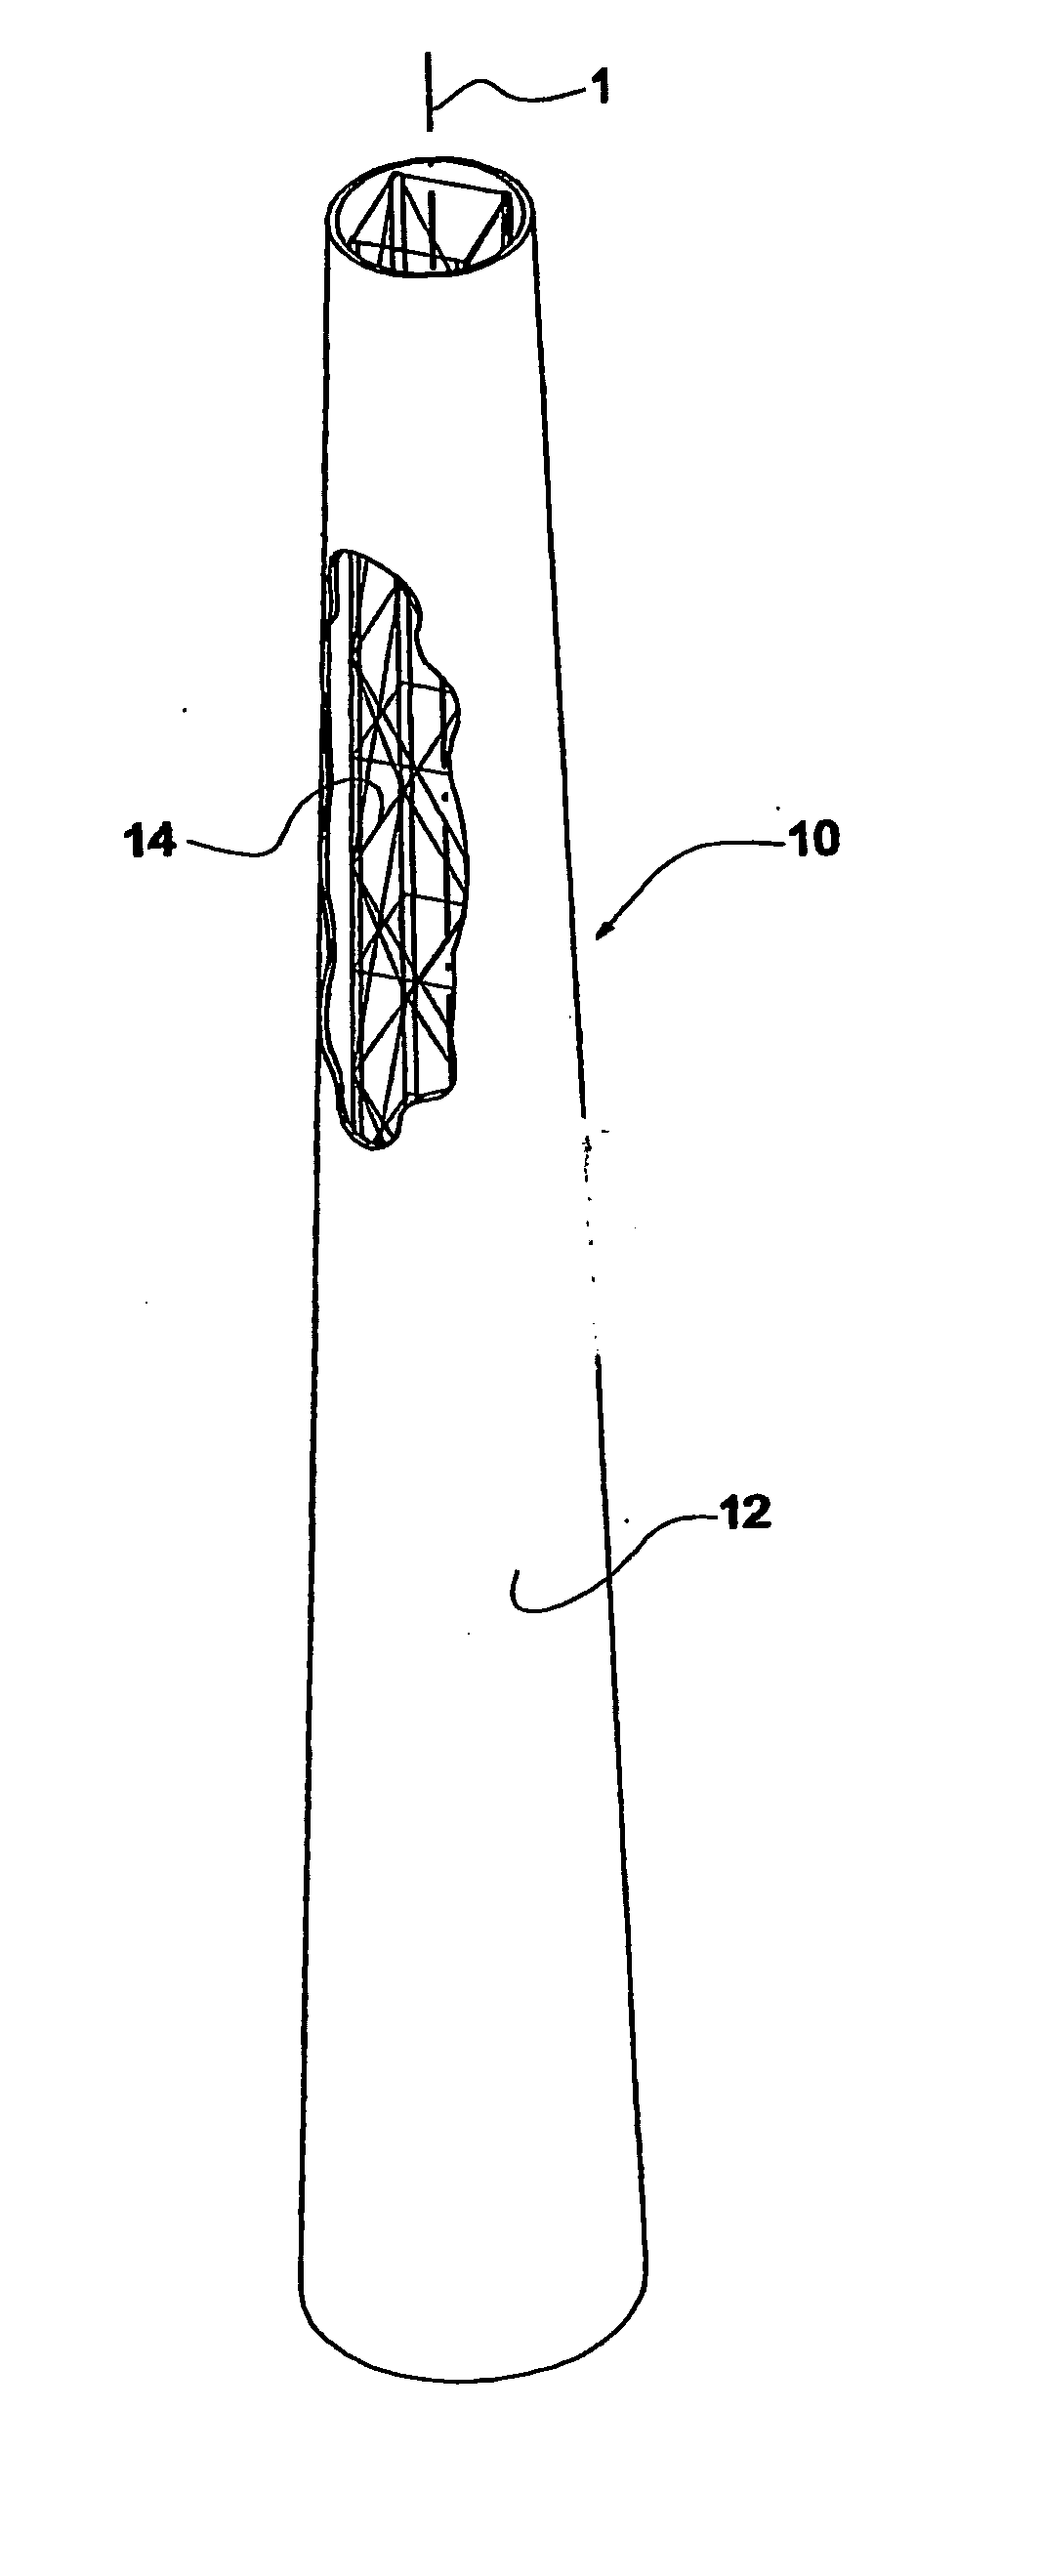 Lattice tower disguised as a monopole